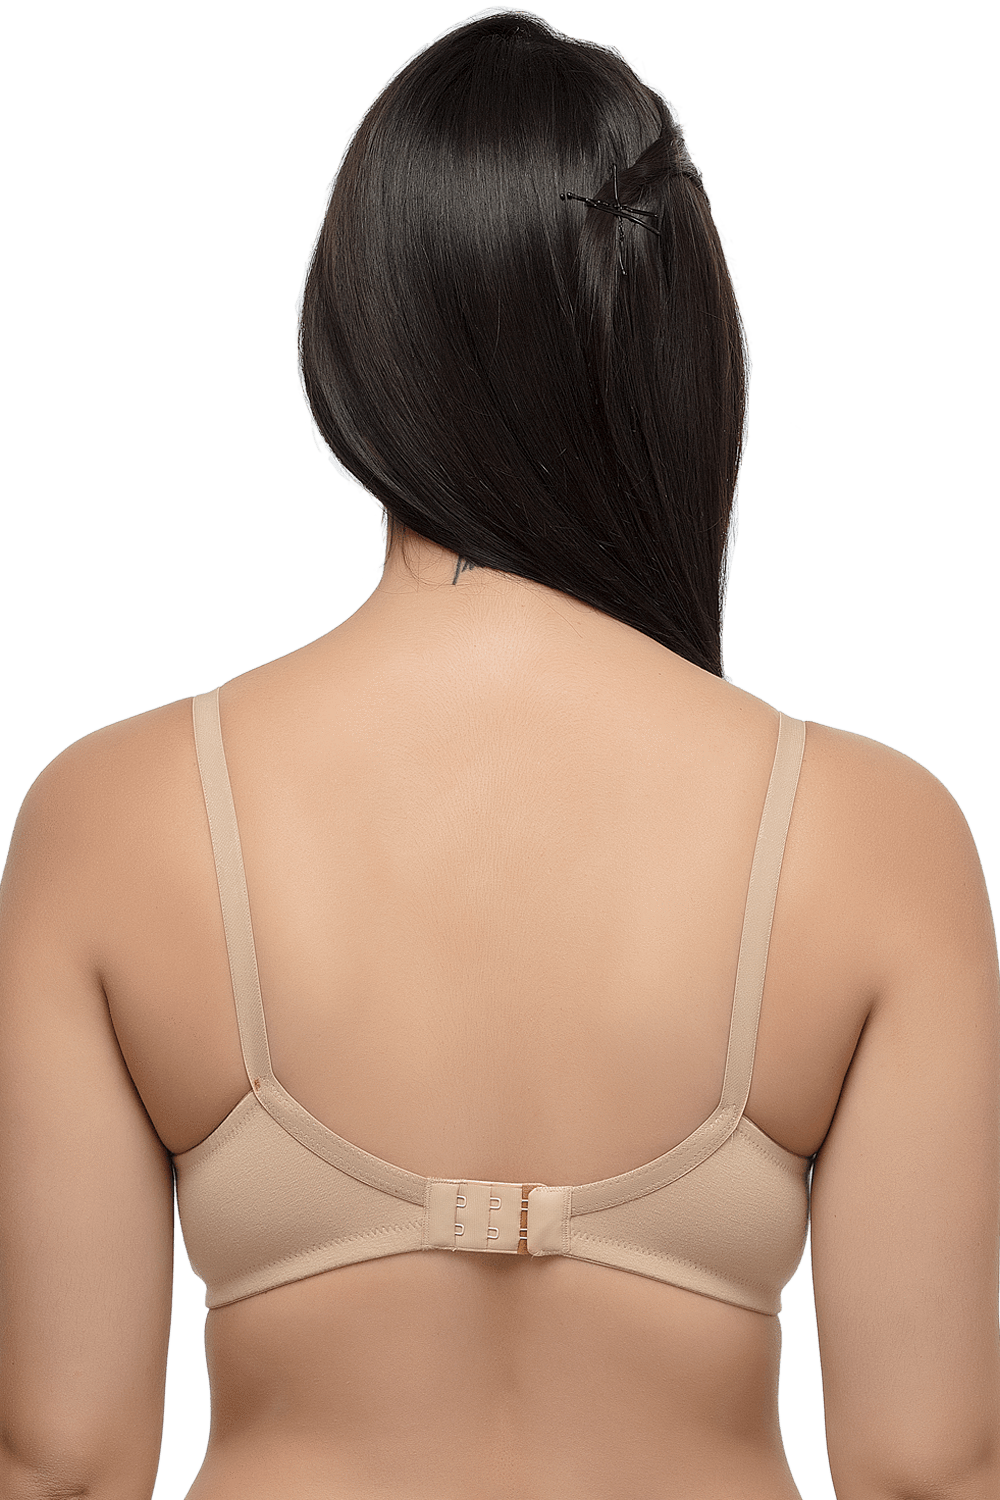 Inner Sense Organic Cotton Antimicrobial Seamless Side Support Bra bra, Bras, Cotton, featured, full back coverage, organic - bare essentials